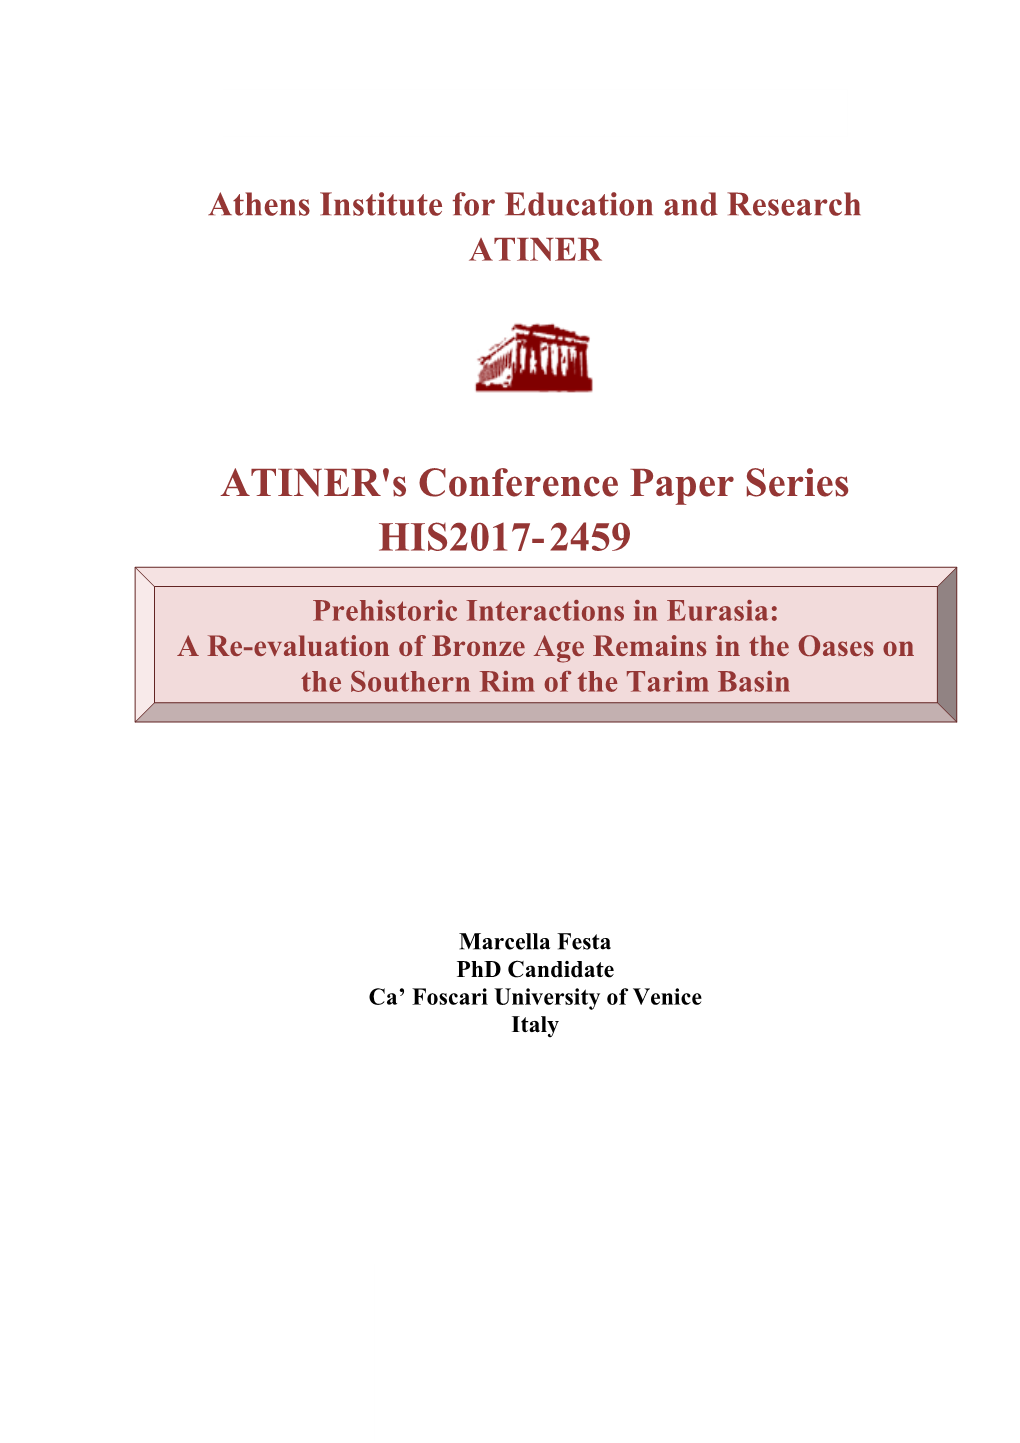 ATINER's Conference Paper Series HIS2017-2459